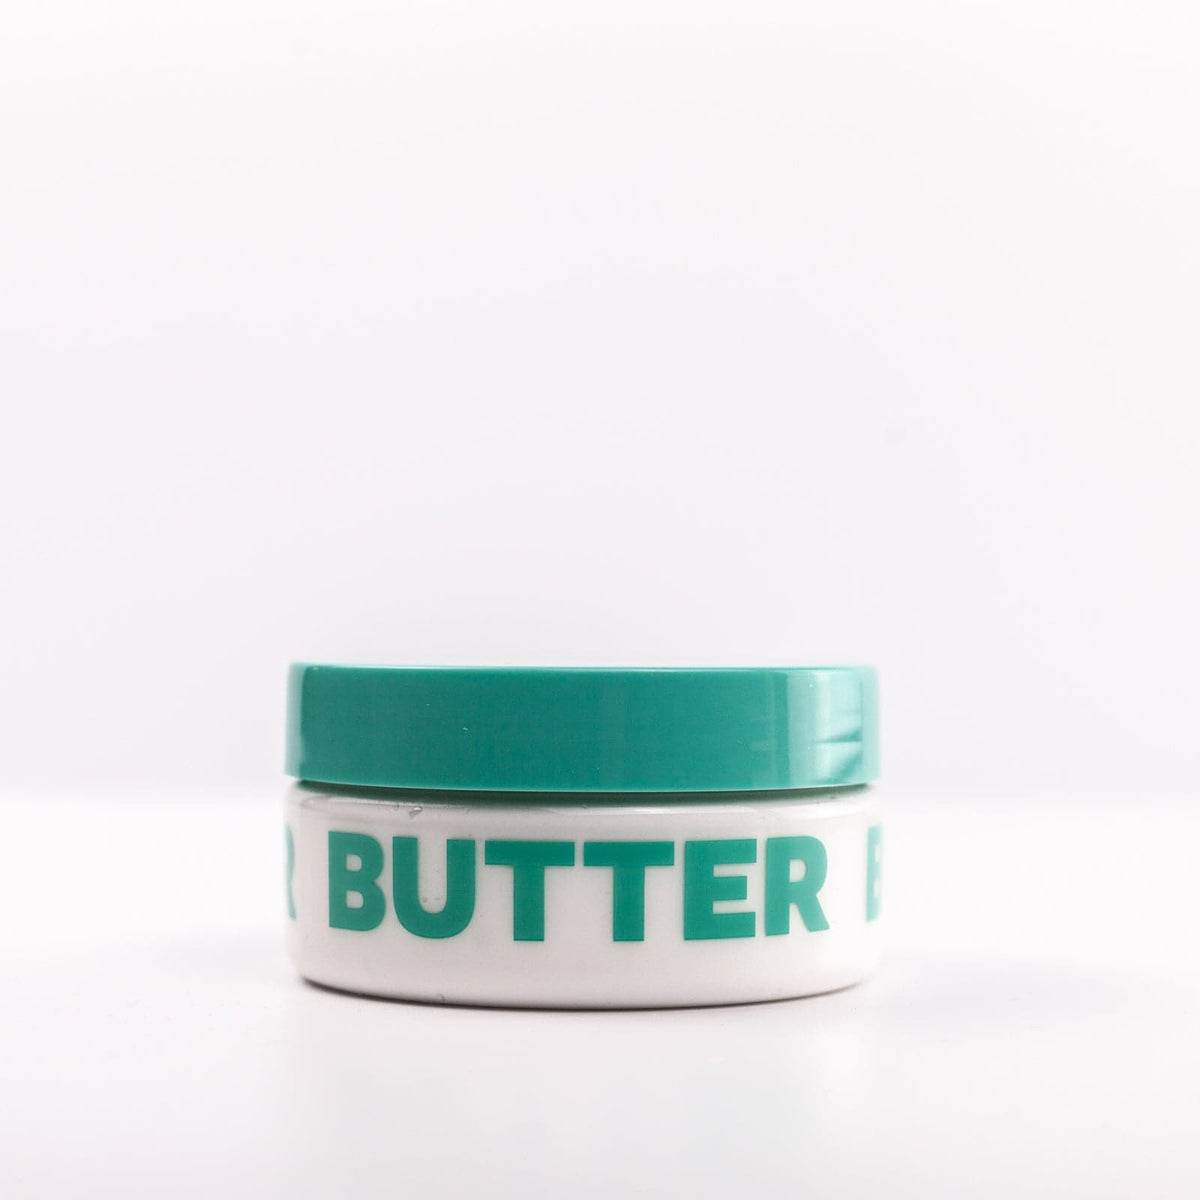 Shore Thing Body Butter